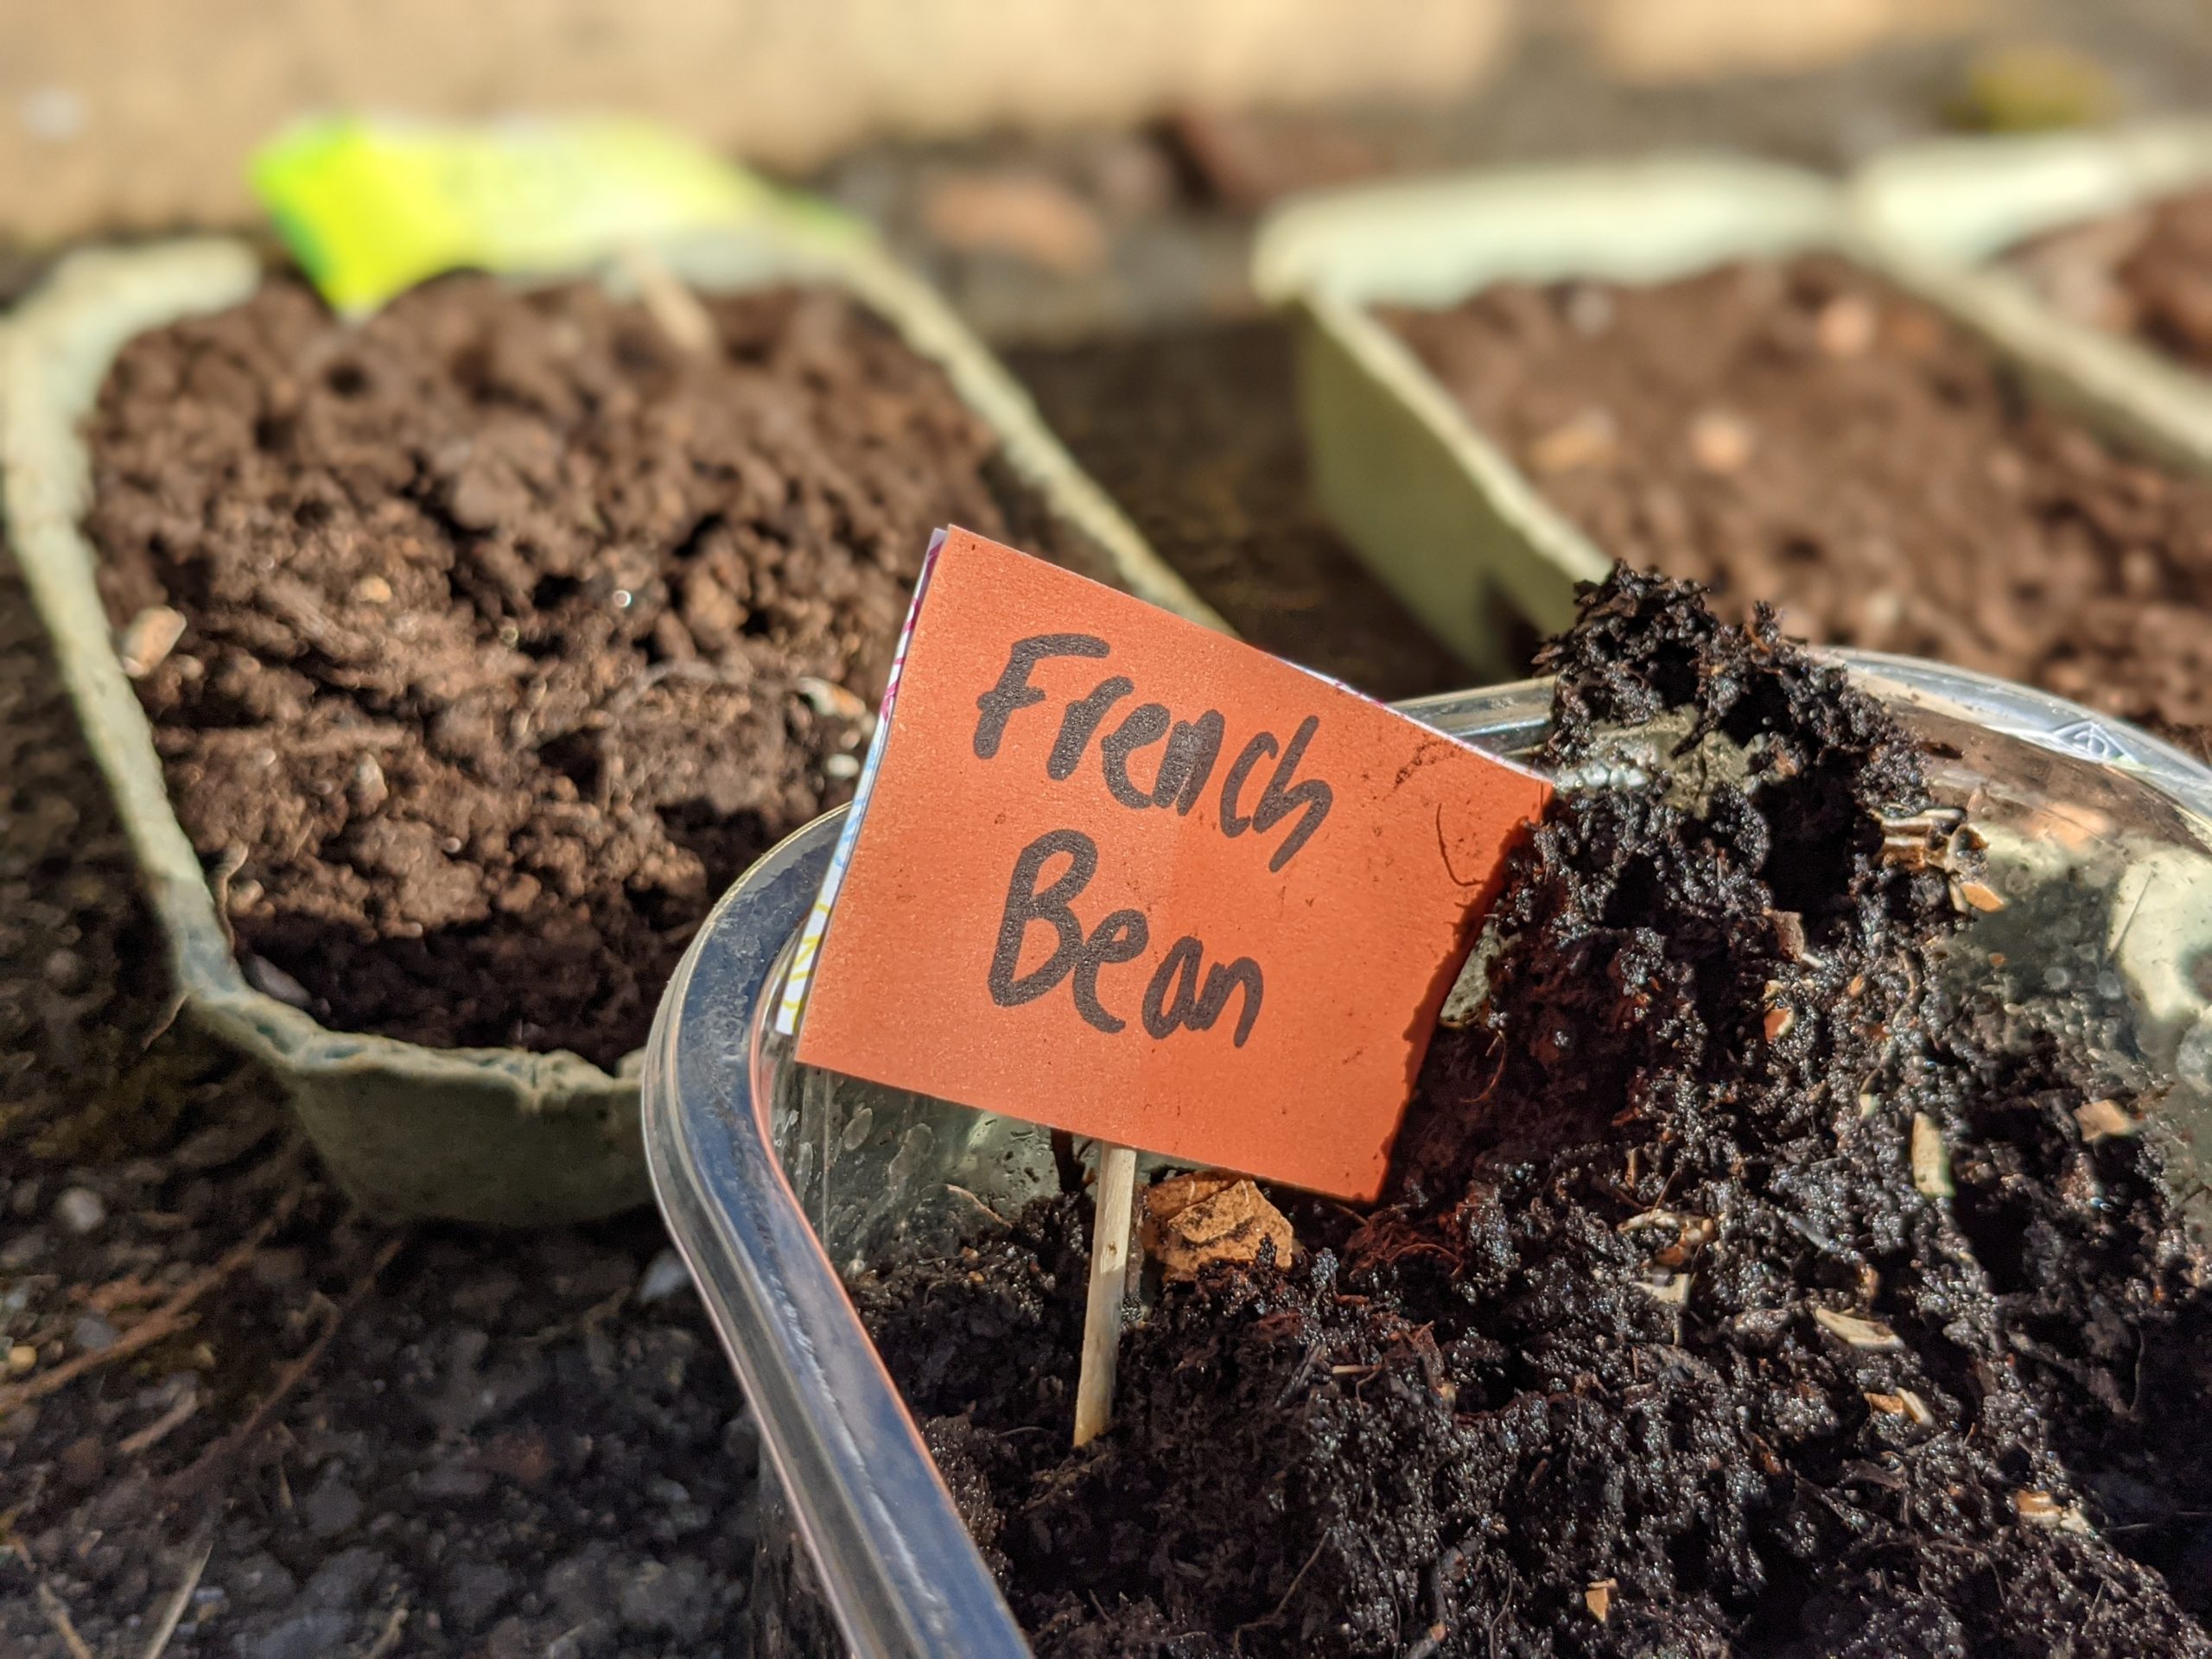 An egg box filled with compost ad a little sign saying French Beans